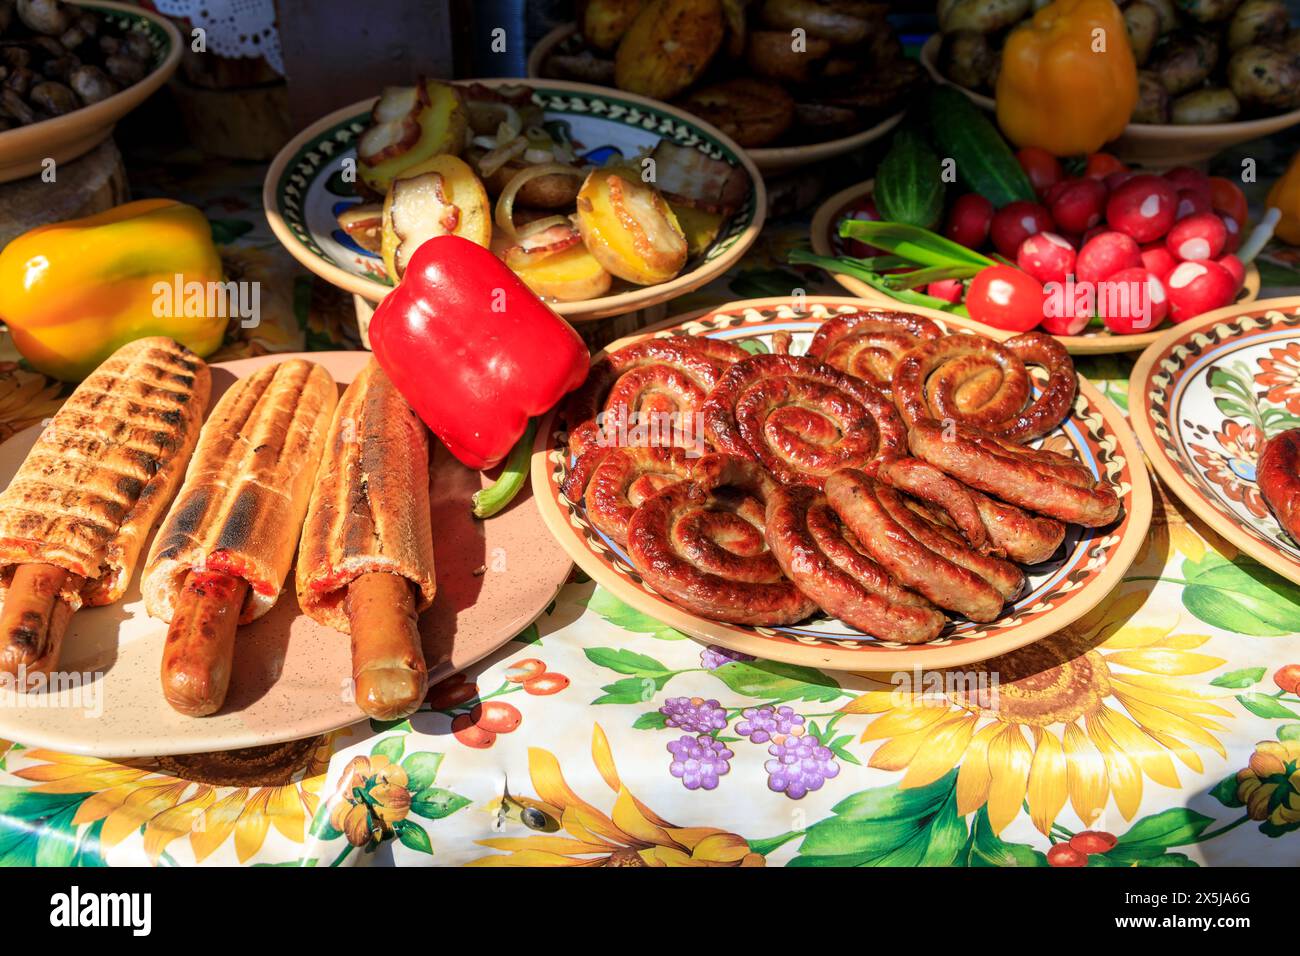 Ukraine, Kiev, Kyiv. Pork and beef wurst being served at a picnic. Village of Olkhovsky outside the city. Stock Photo